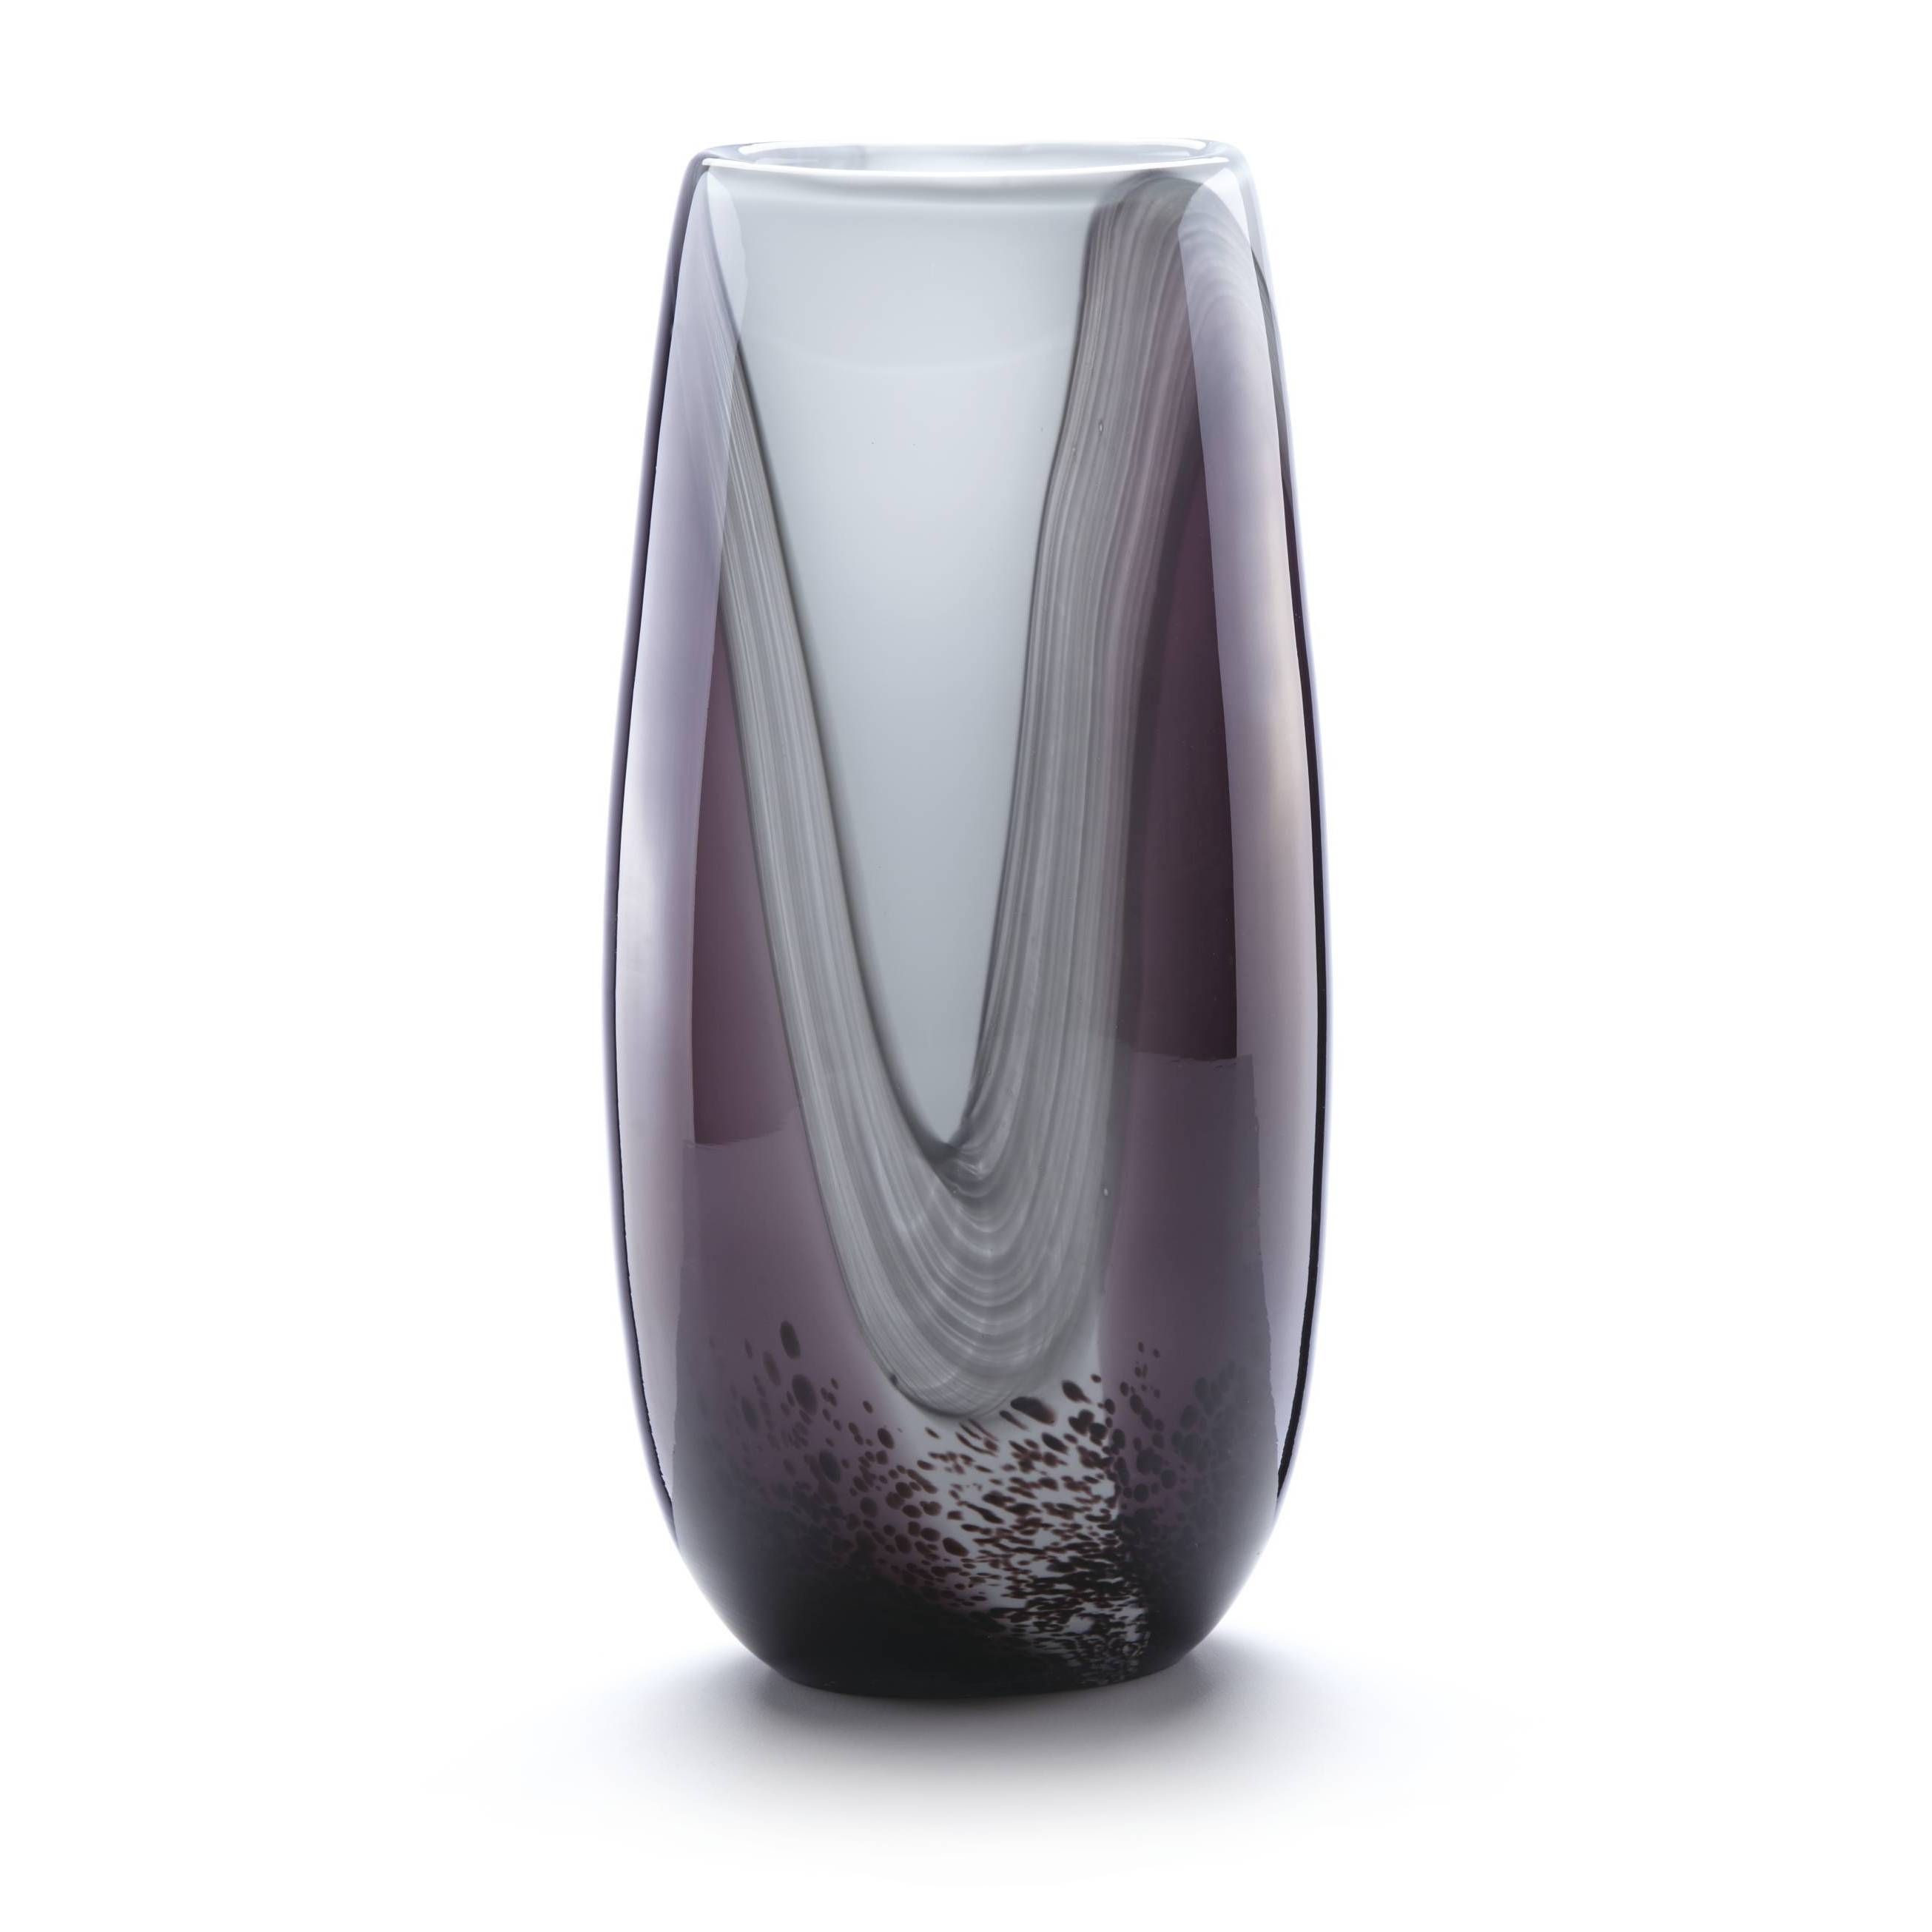 24 Nice Large Floor Vase 36 Inch 2024 free download large floor vase 36 inch of lenox novia purple crystal 11 inch large vase outlet store and pertaining to lenox novia purple crystal 11 inch large vase novia grey size